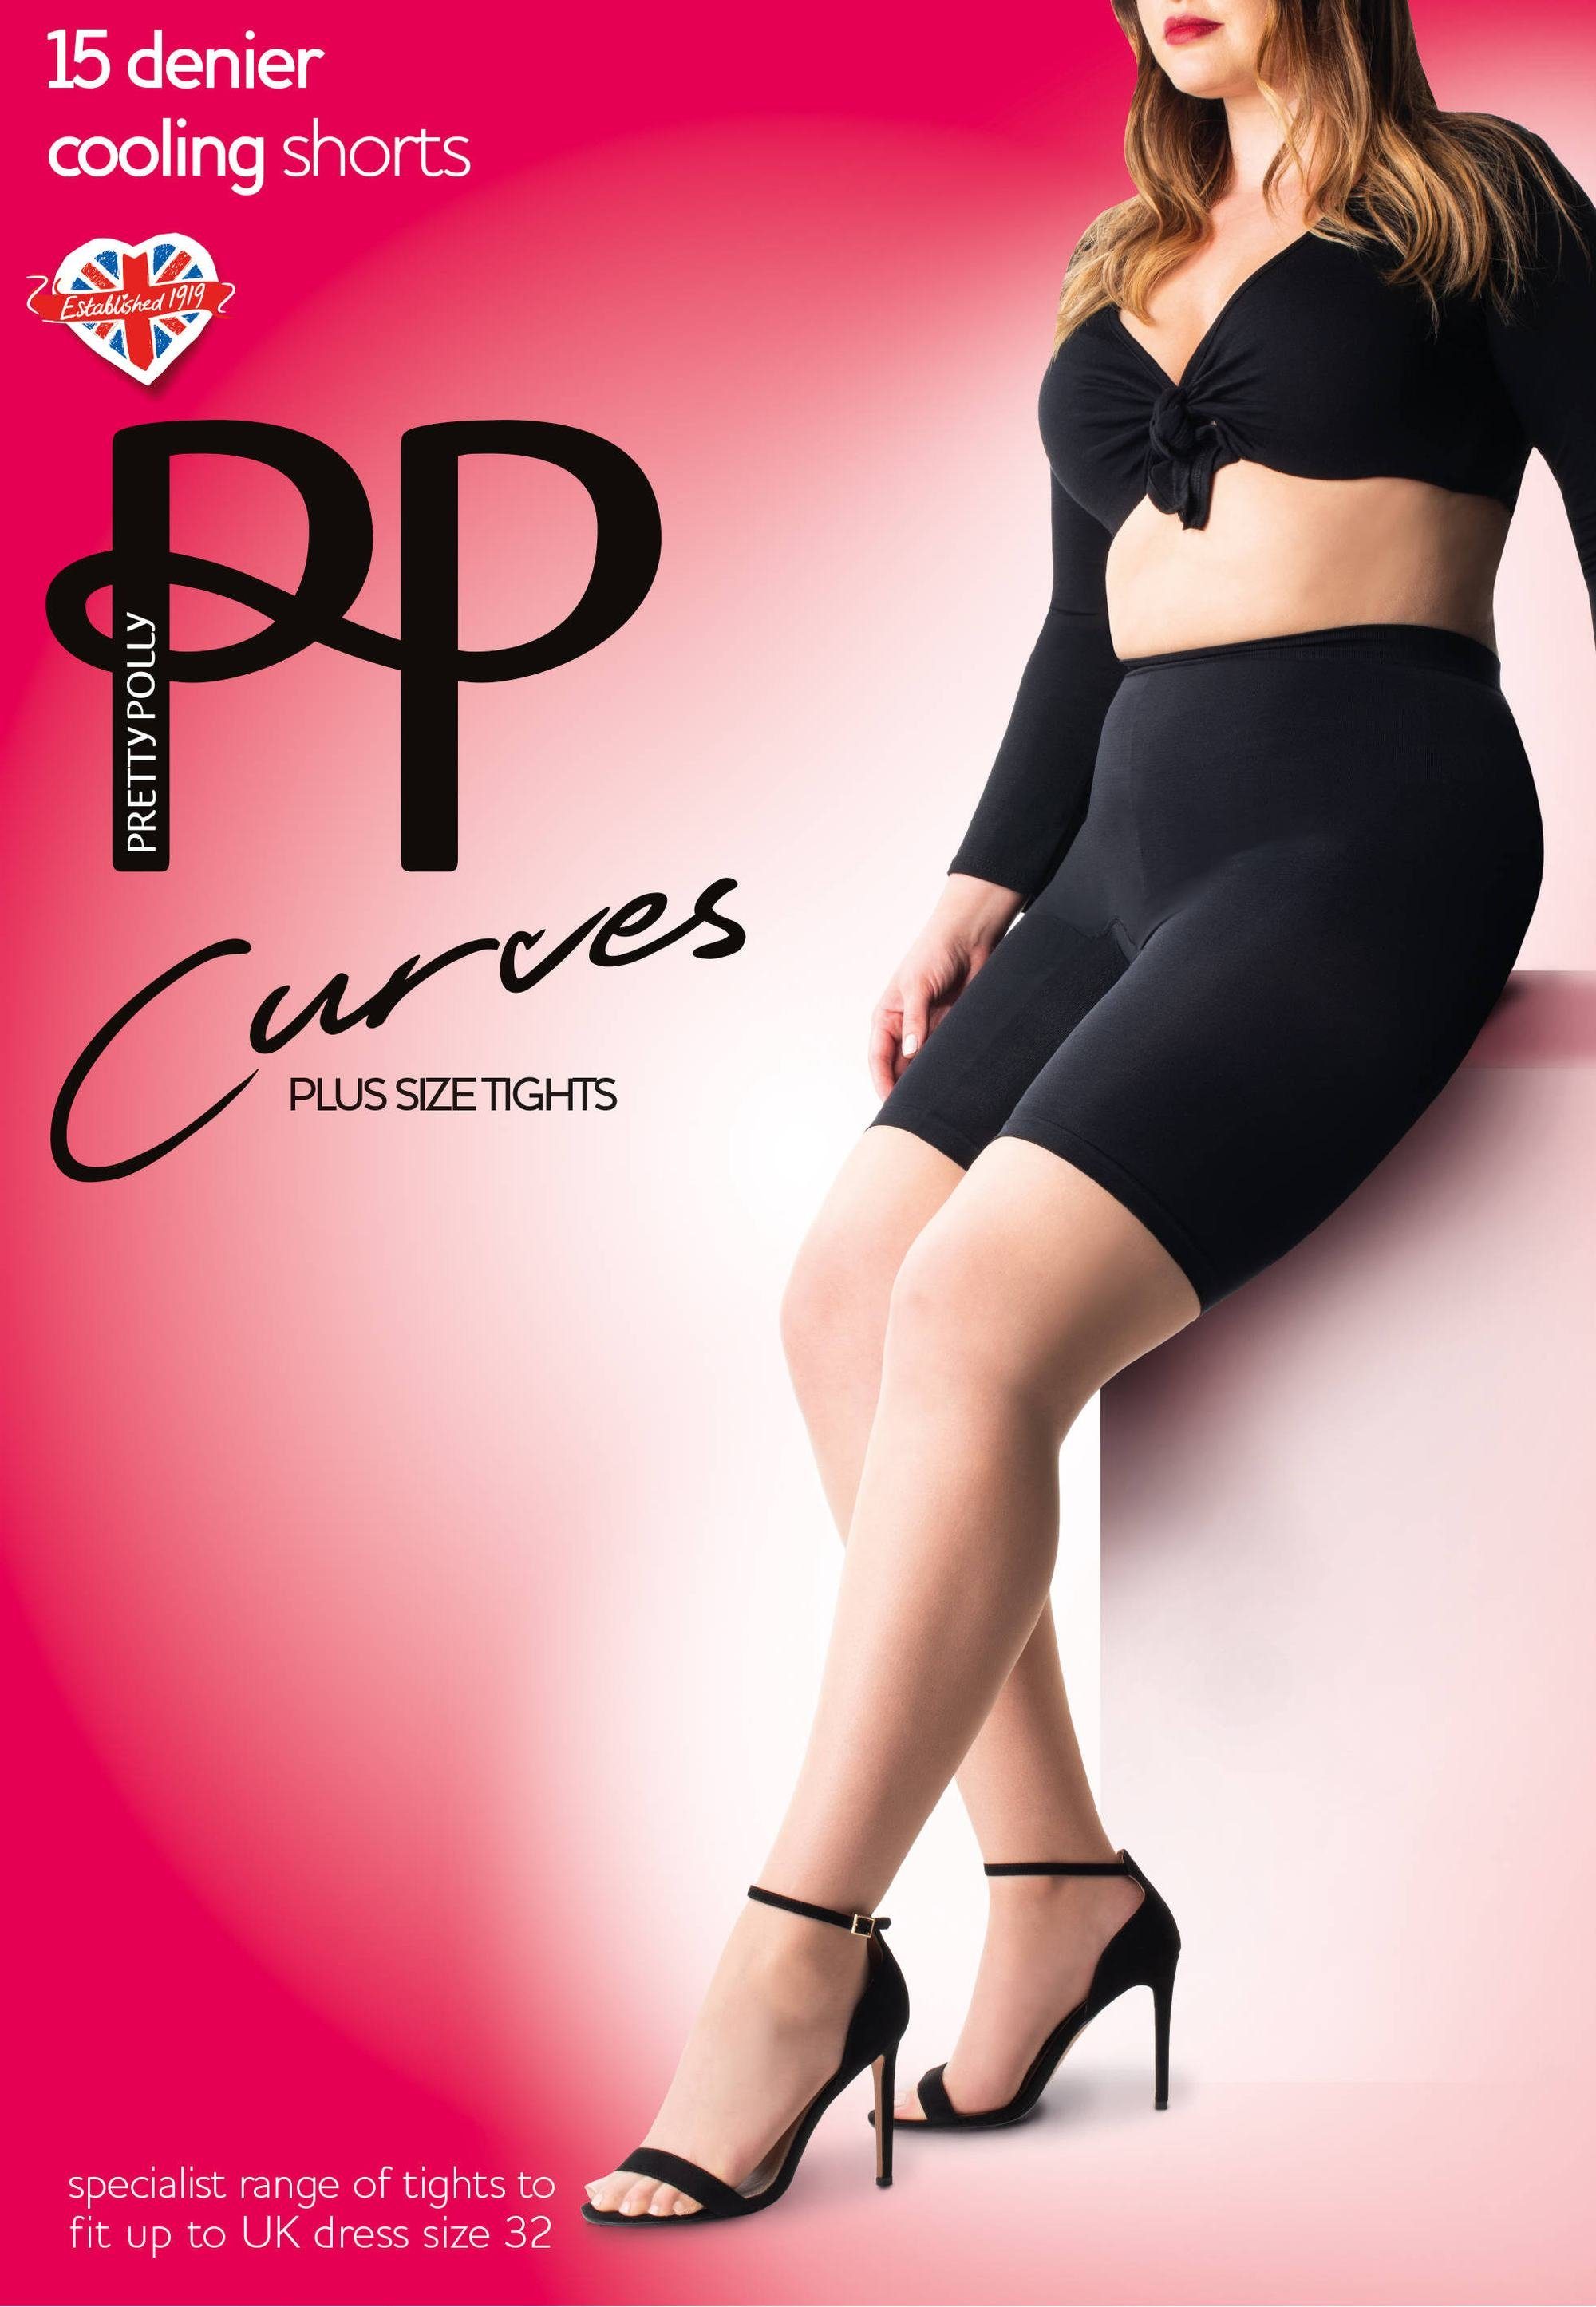 Pretty Polly Miederslip Curves Cooling Short Black Sheer